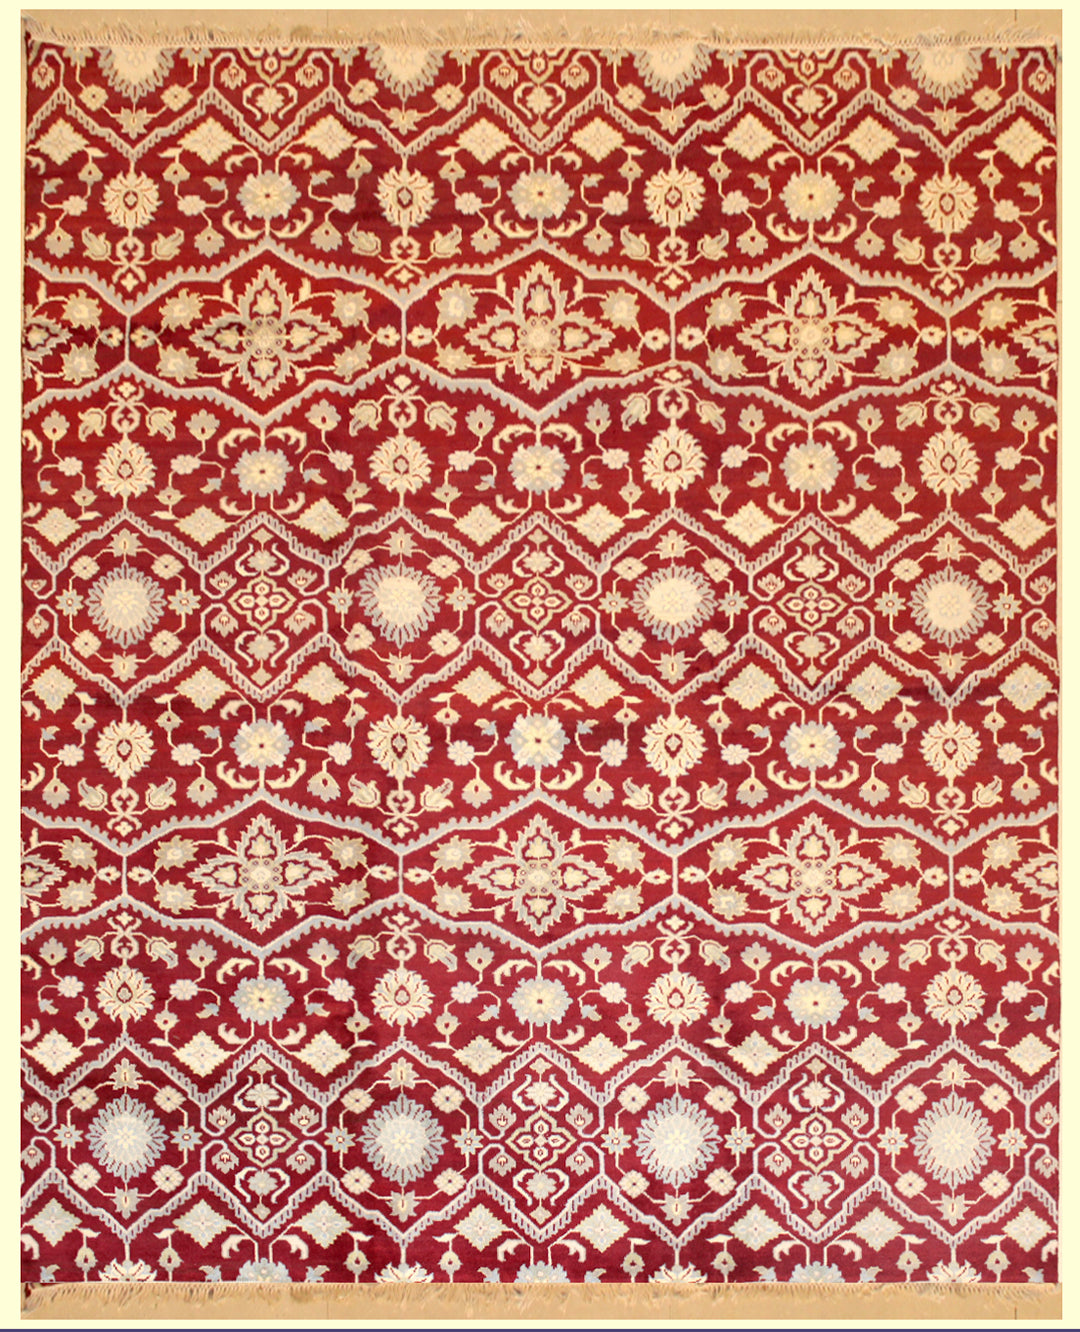 8 feet by 10 feet modern rug. 8 feet by 10 feet modern rug. The colours mainly include red, beige and tan.